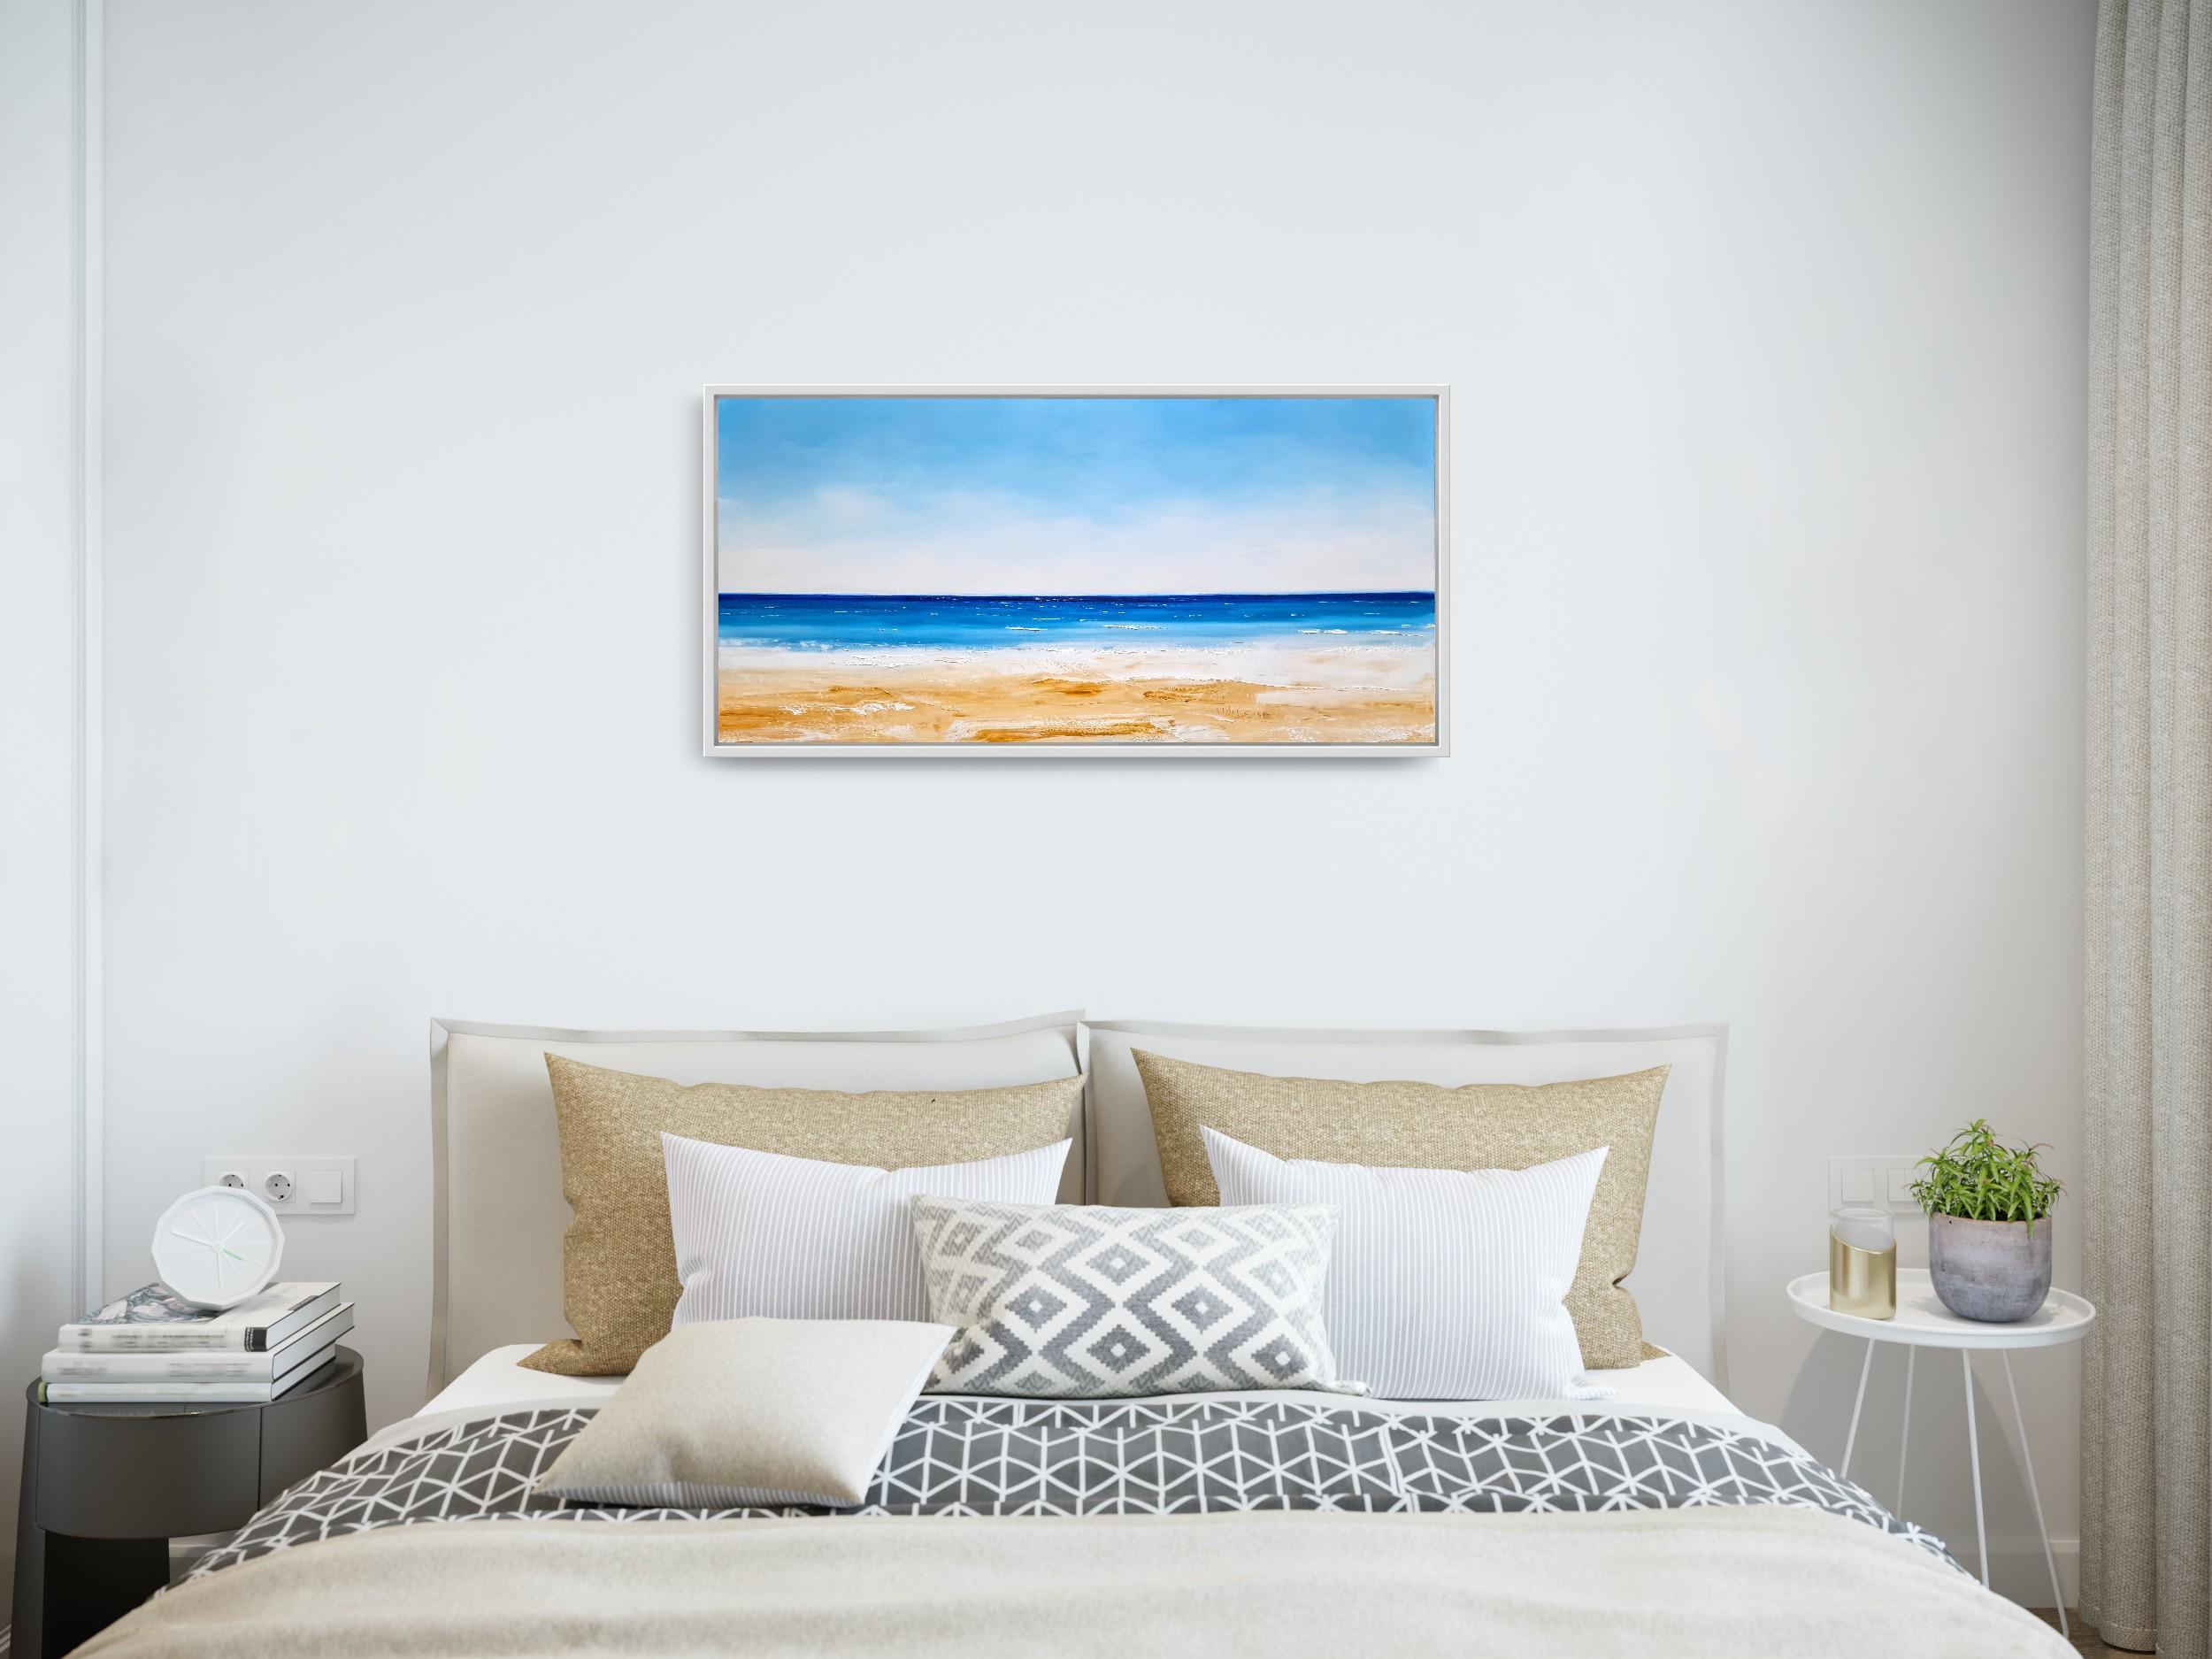 Refreshing Days at the Beach, seascape art, original art, affordable art - Painting by Georgie Dowling